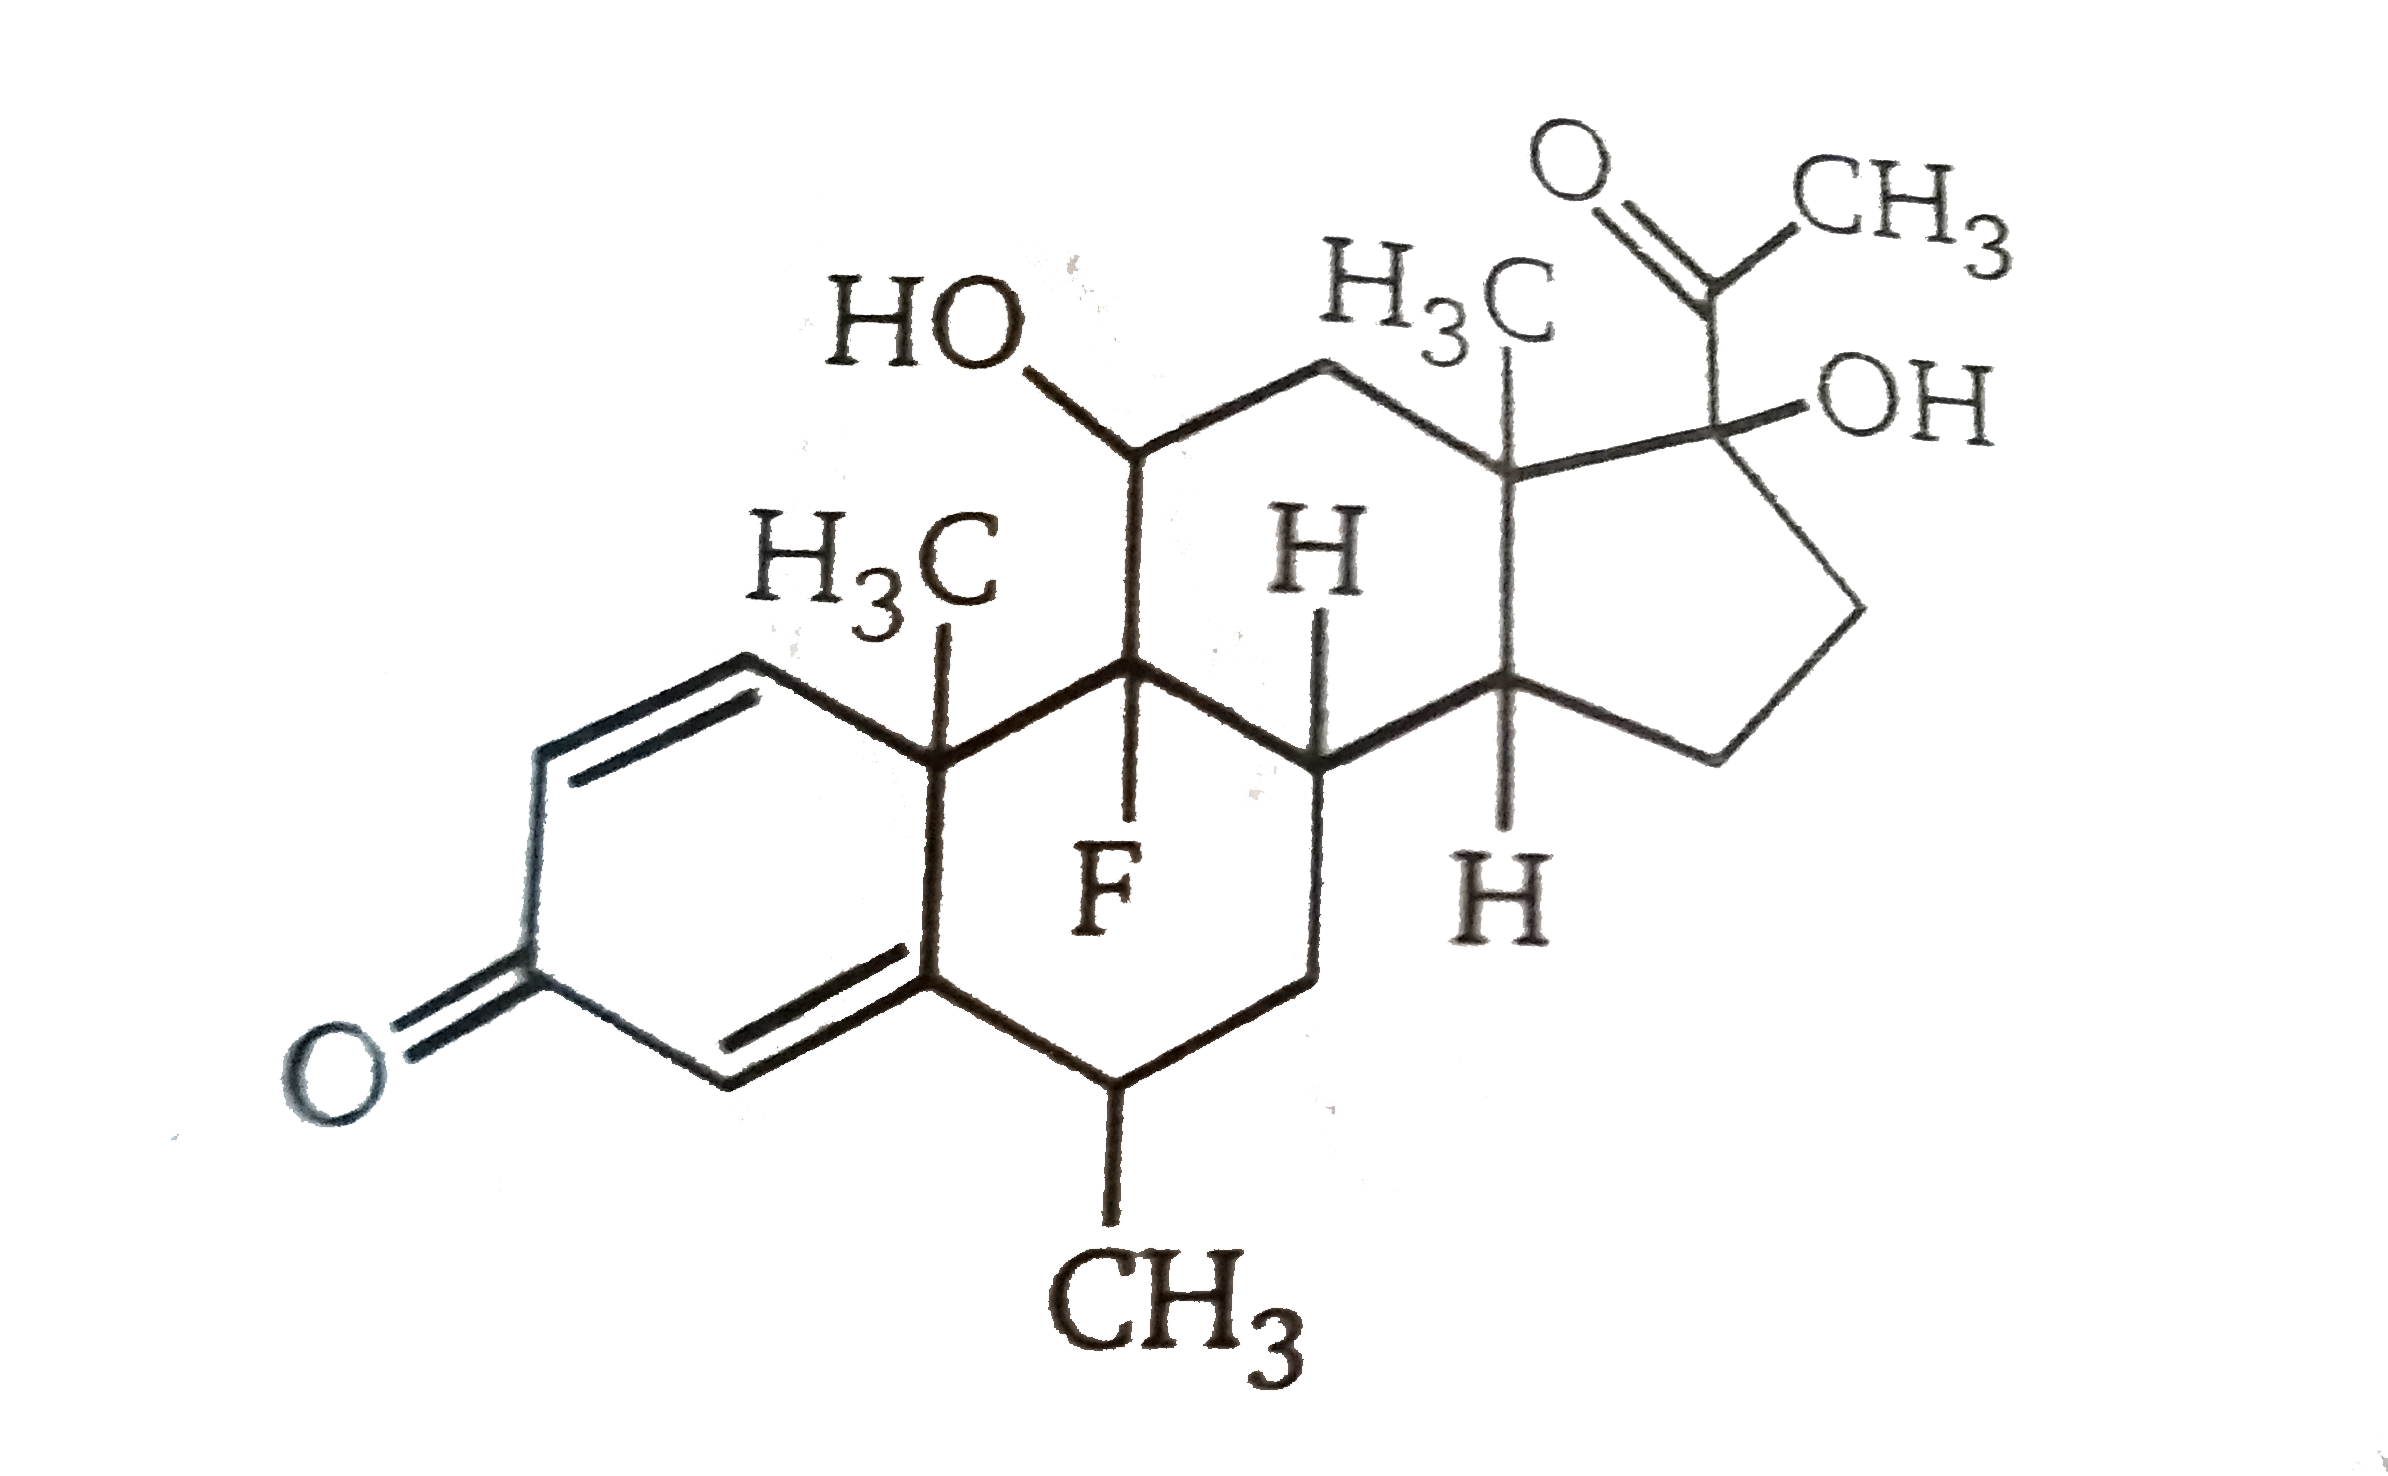 The following molecule is flourometholone, a steroidal anti-inflammatory agent. How many steregenic centers does it contain ?